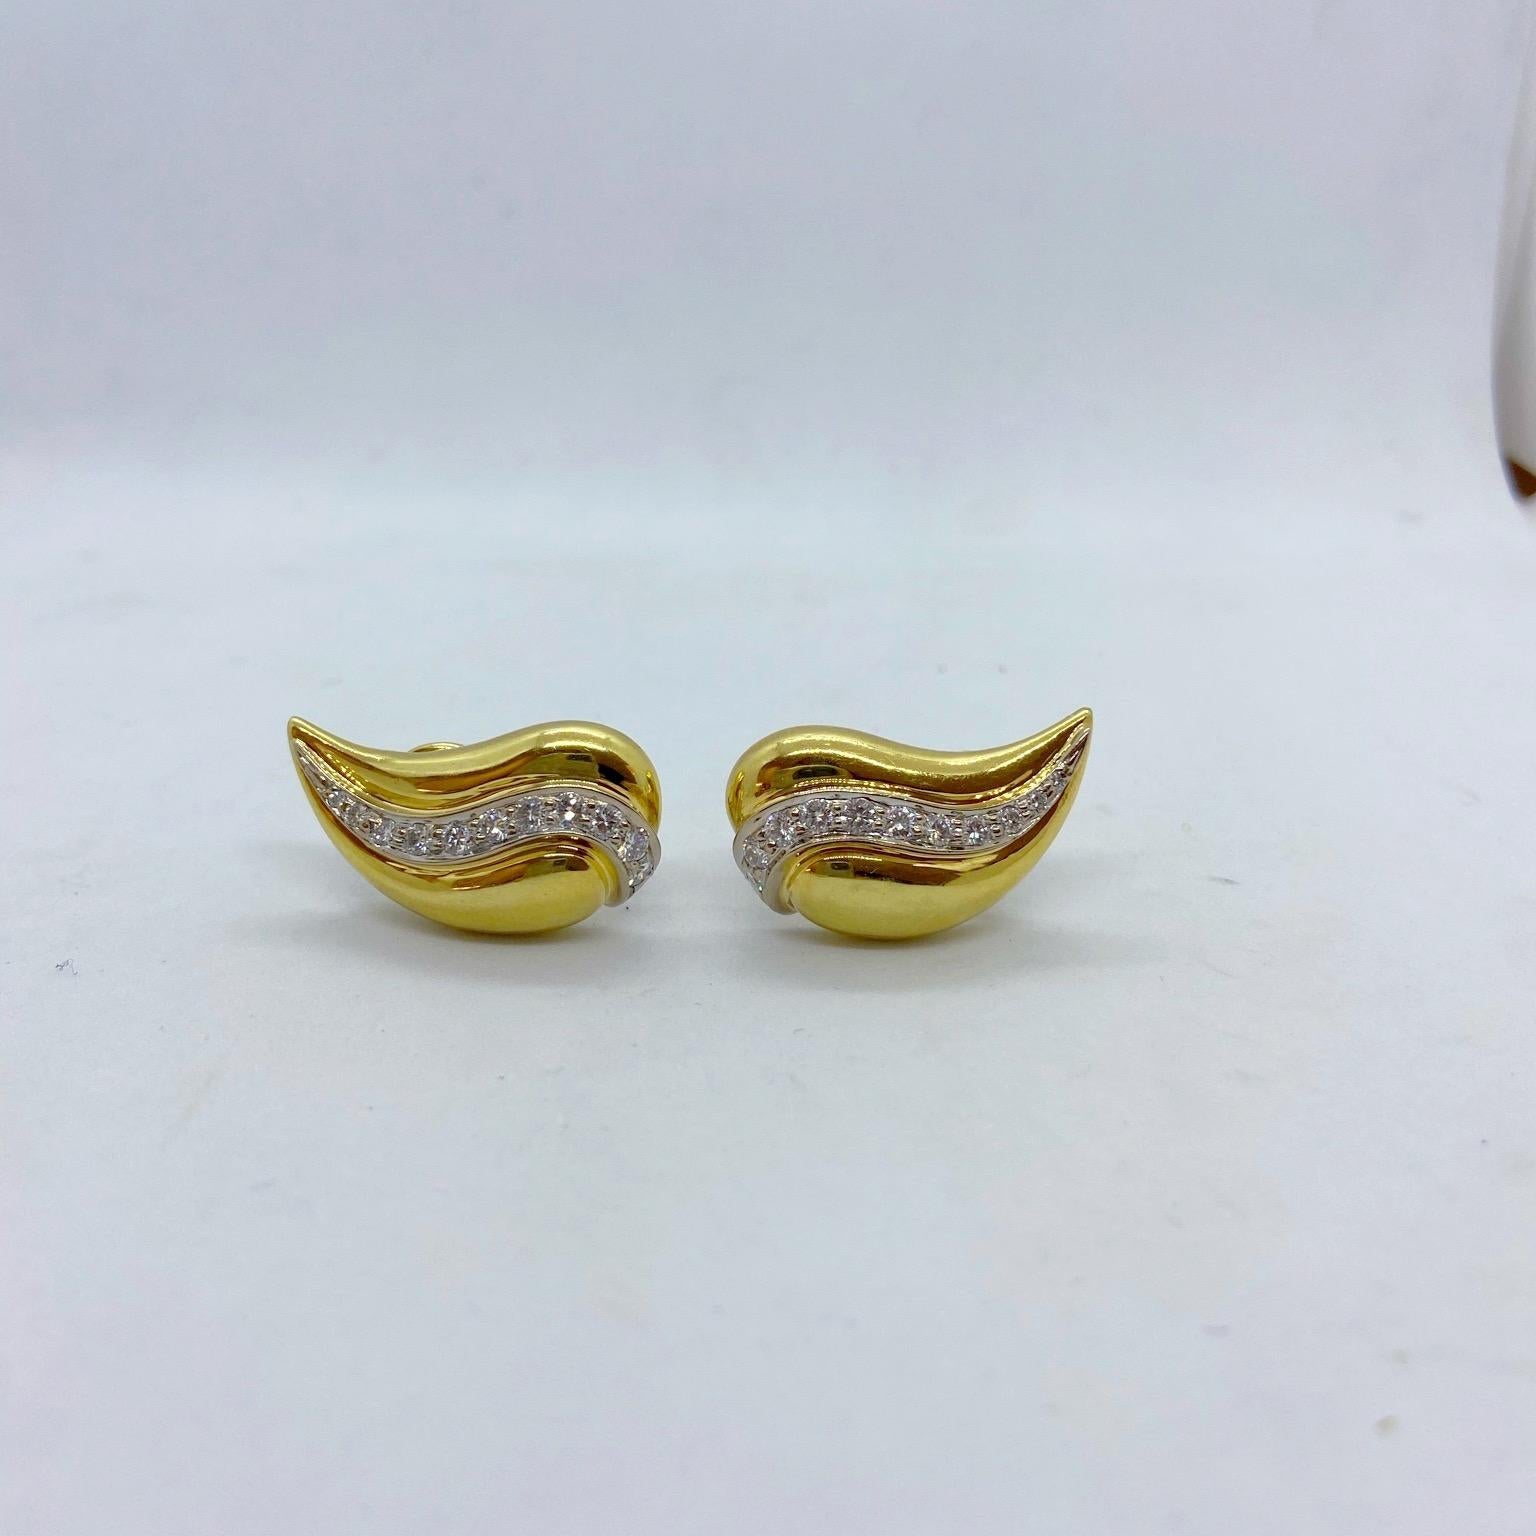 Designed in 18 karat shiny yellow gold, these teardrop shaped earrings center a single row of round diamonds set in white gold. The earrings are clip on , posts can be added. They measure 1-1/8